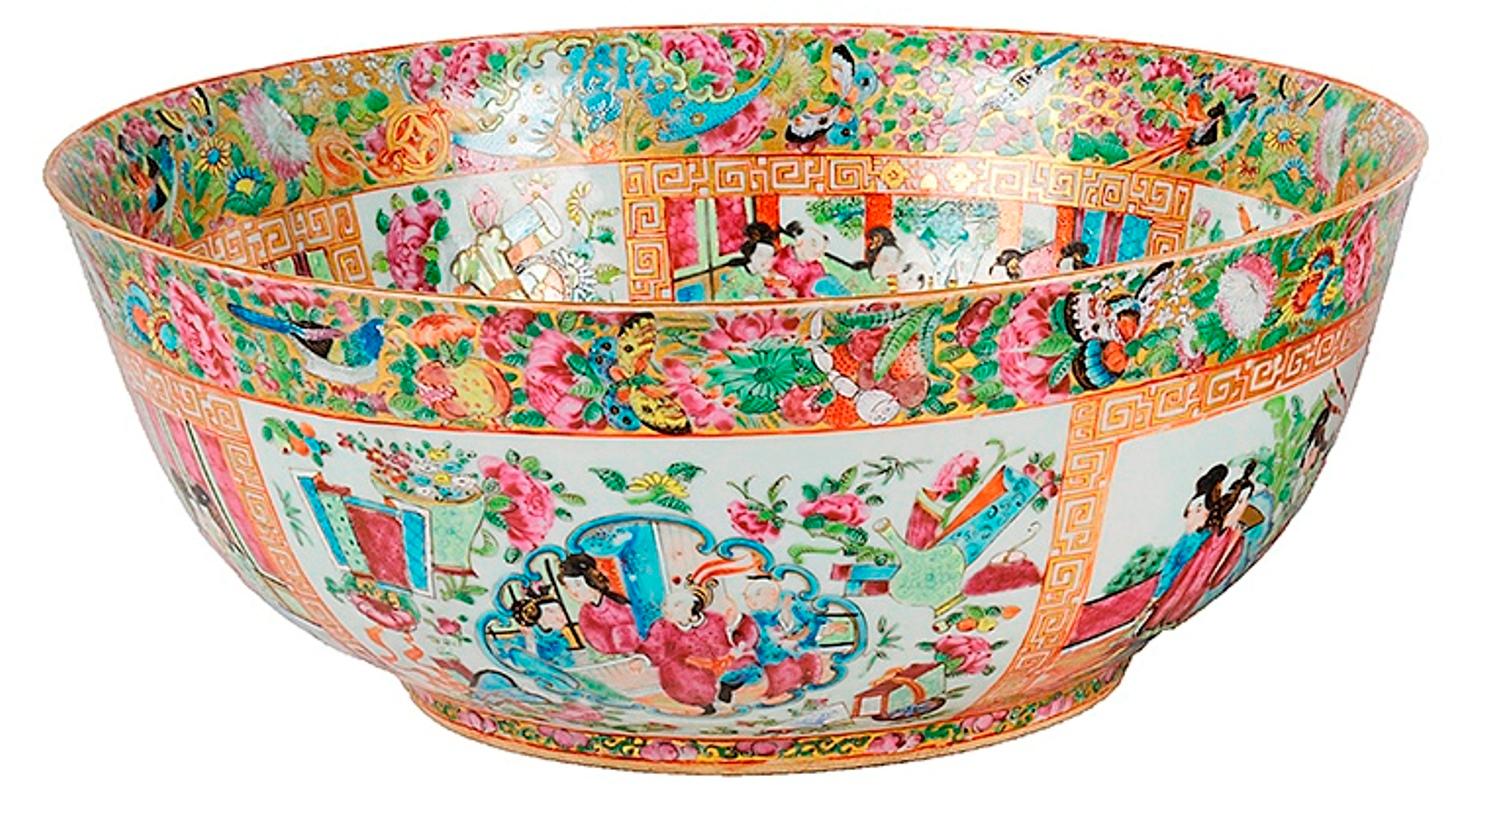 A very good quality late 19th century Chinese Canton / Rose medallion porcelain bowl, having wonderful bold colouring, with a green ground with gilded decoration, classical oriental scenes around the outside and within the centre. Measures: 37cm